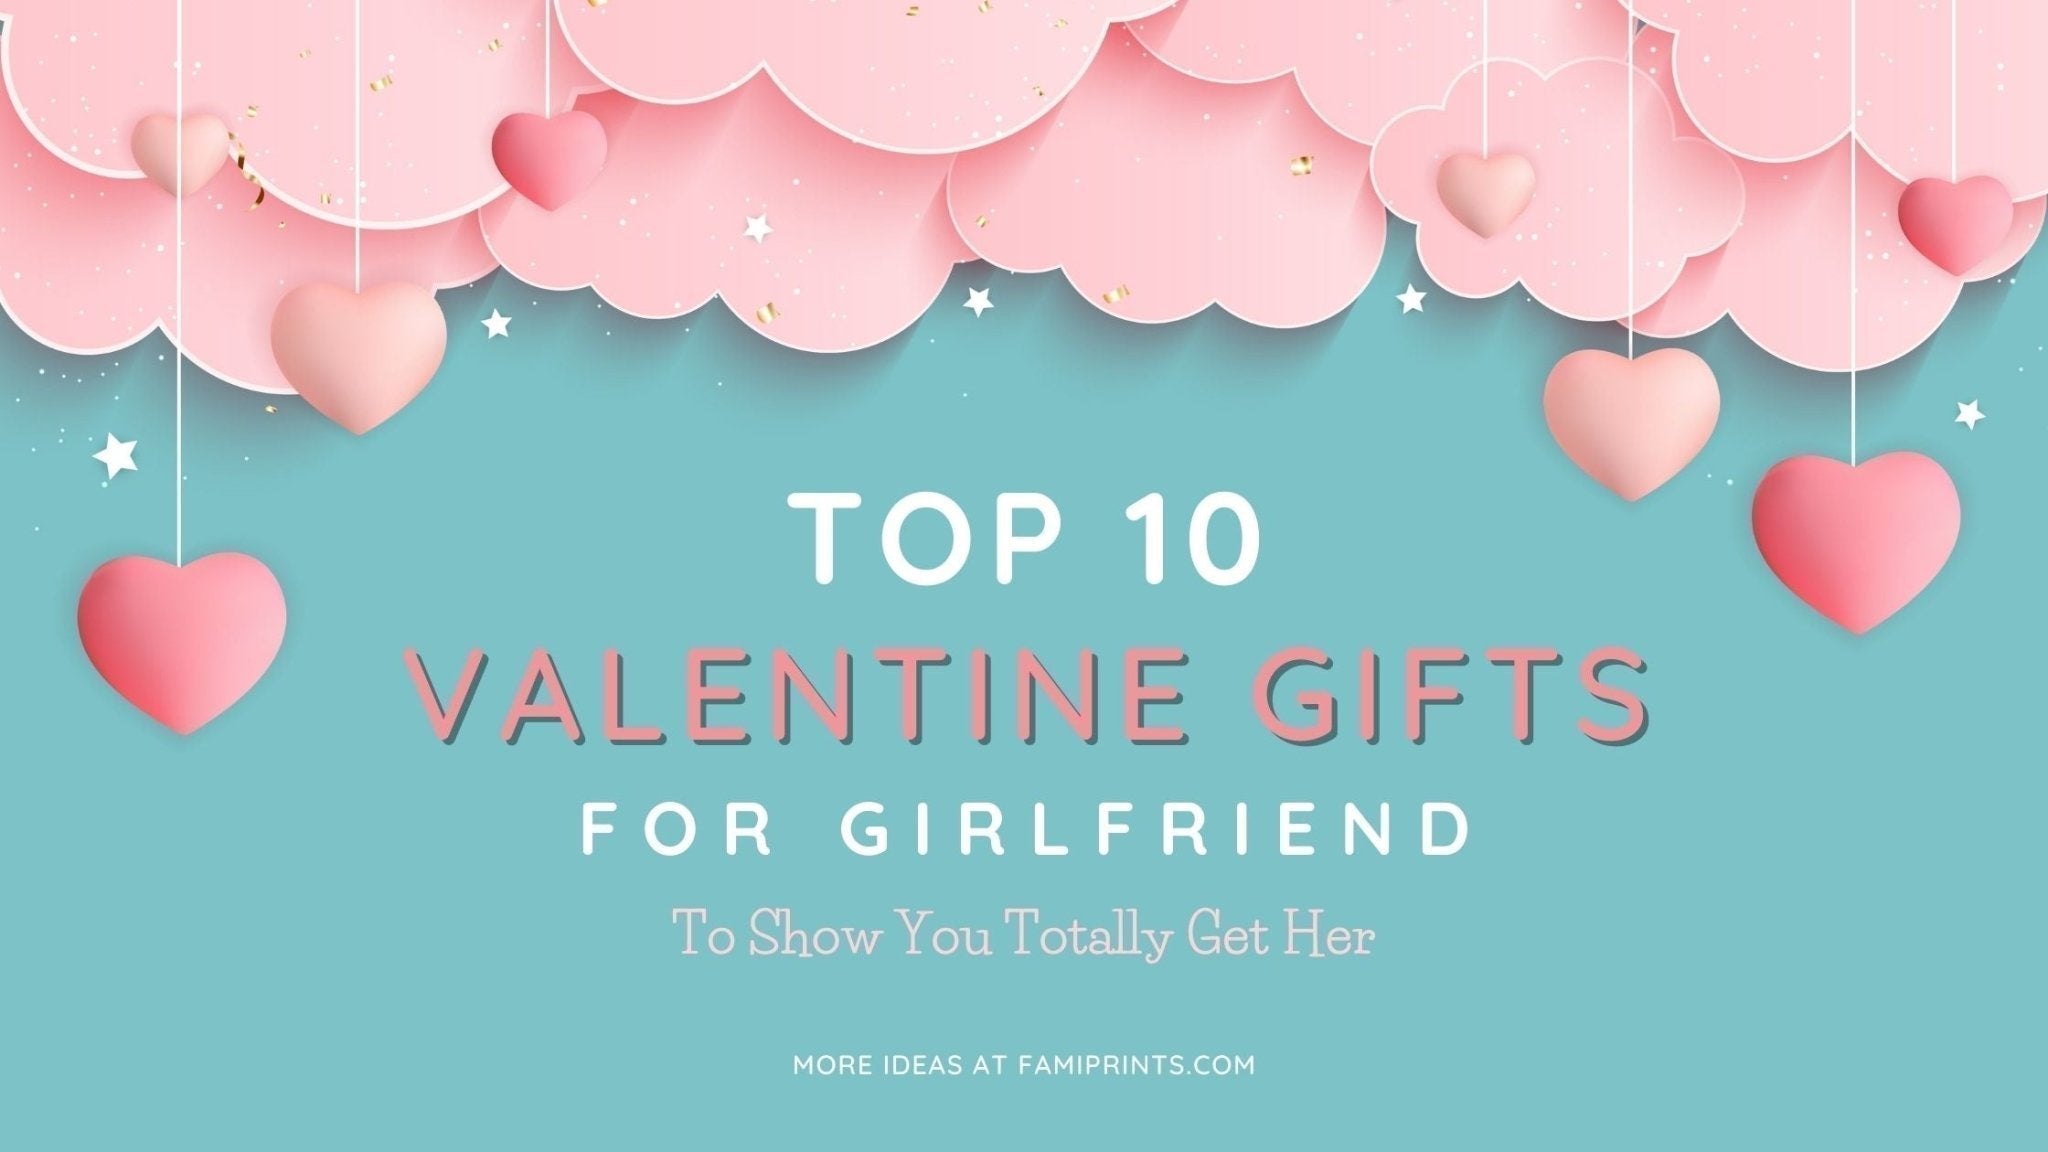 lilla Menneskelige race Misvisende Top 10 Valentine Gifts For Girlfriend To Show You Totally Get Her